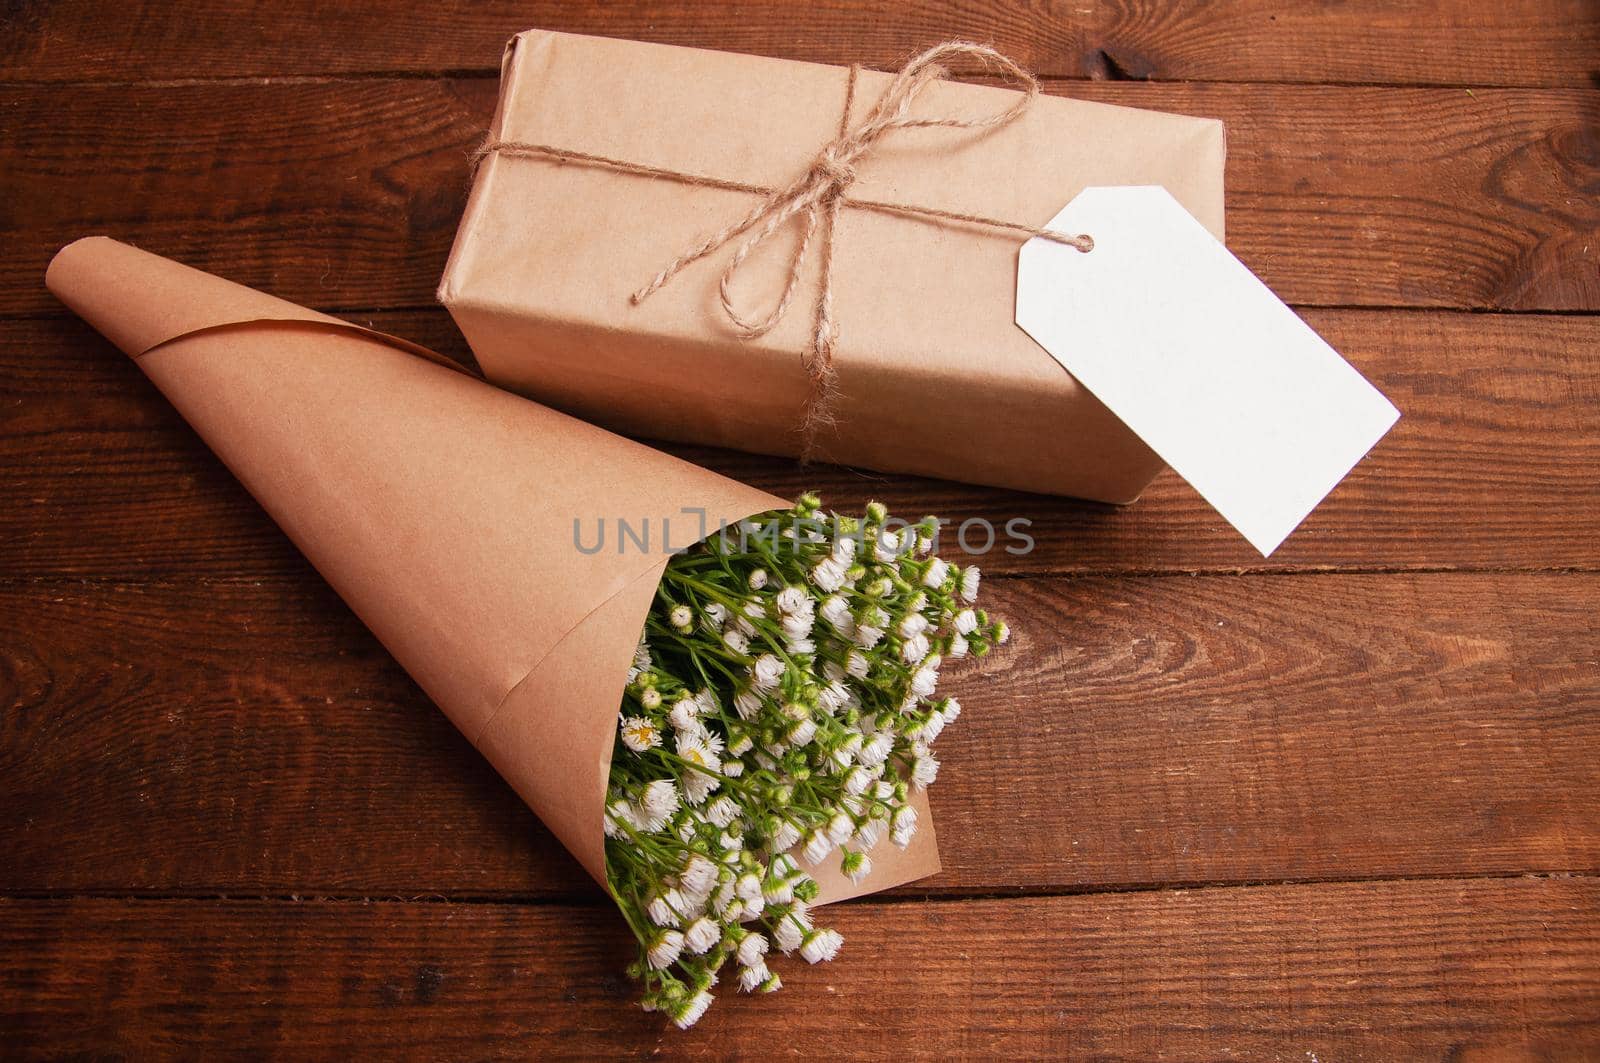 gift is wrapped in craft paper, next to it is a bouquet of chamomile flowers  by ozornina